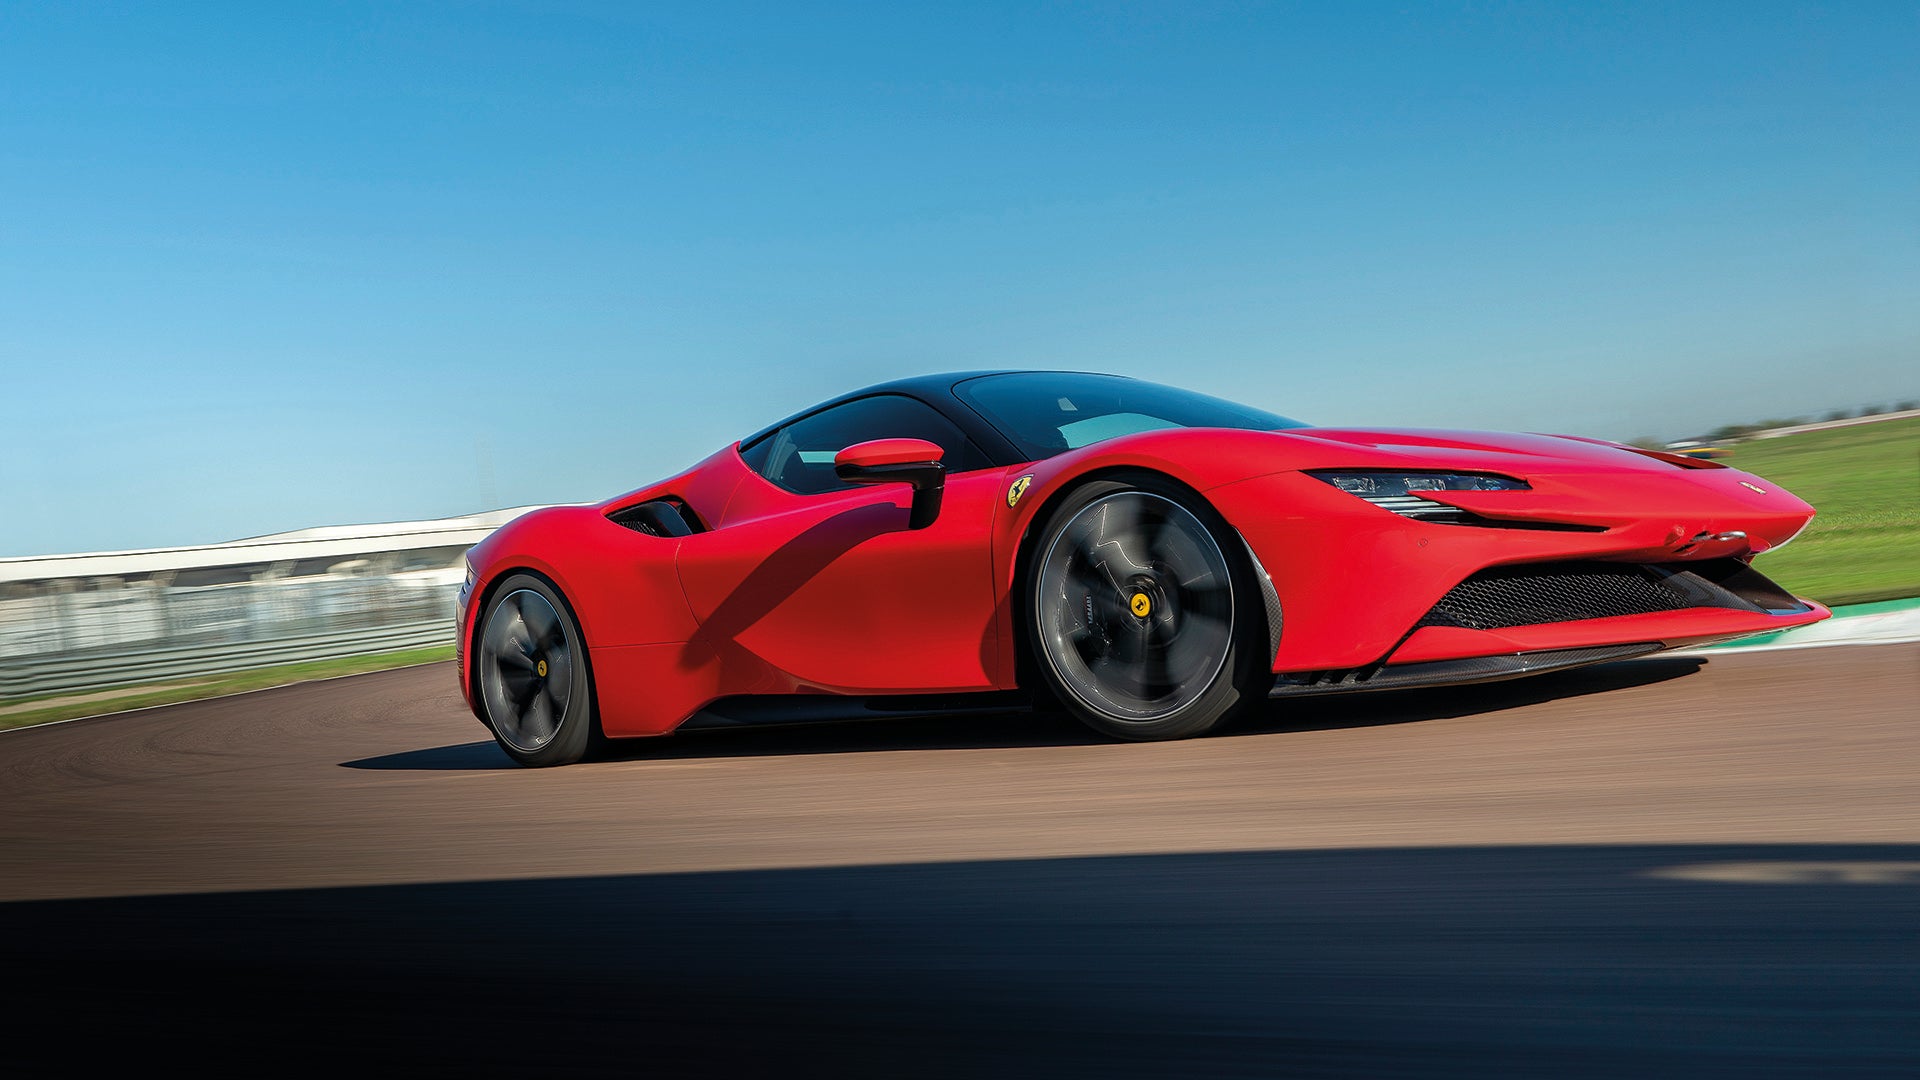 Buying a $600,000+ Ferrari SF90 Stradale Will Get You a $3,500 PHEV Tax Credit